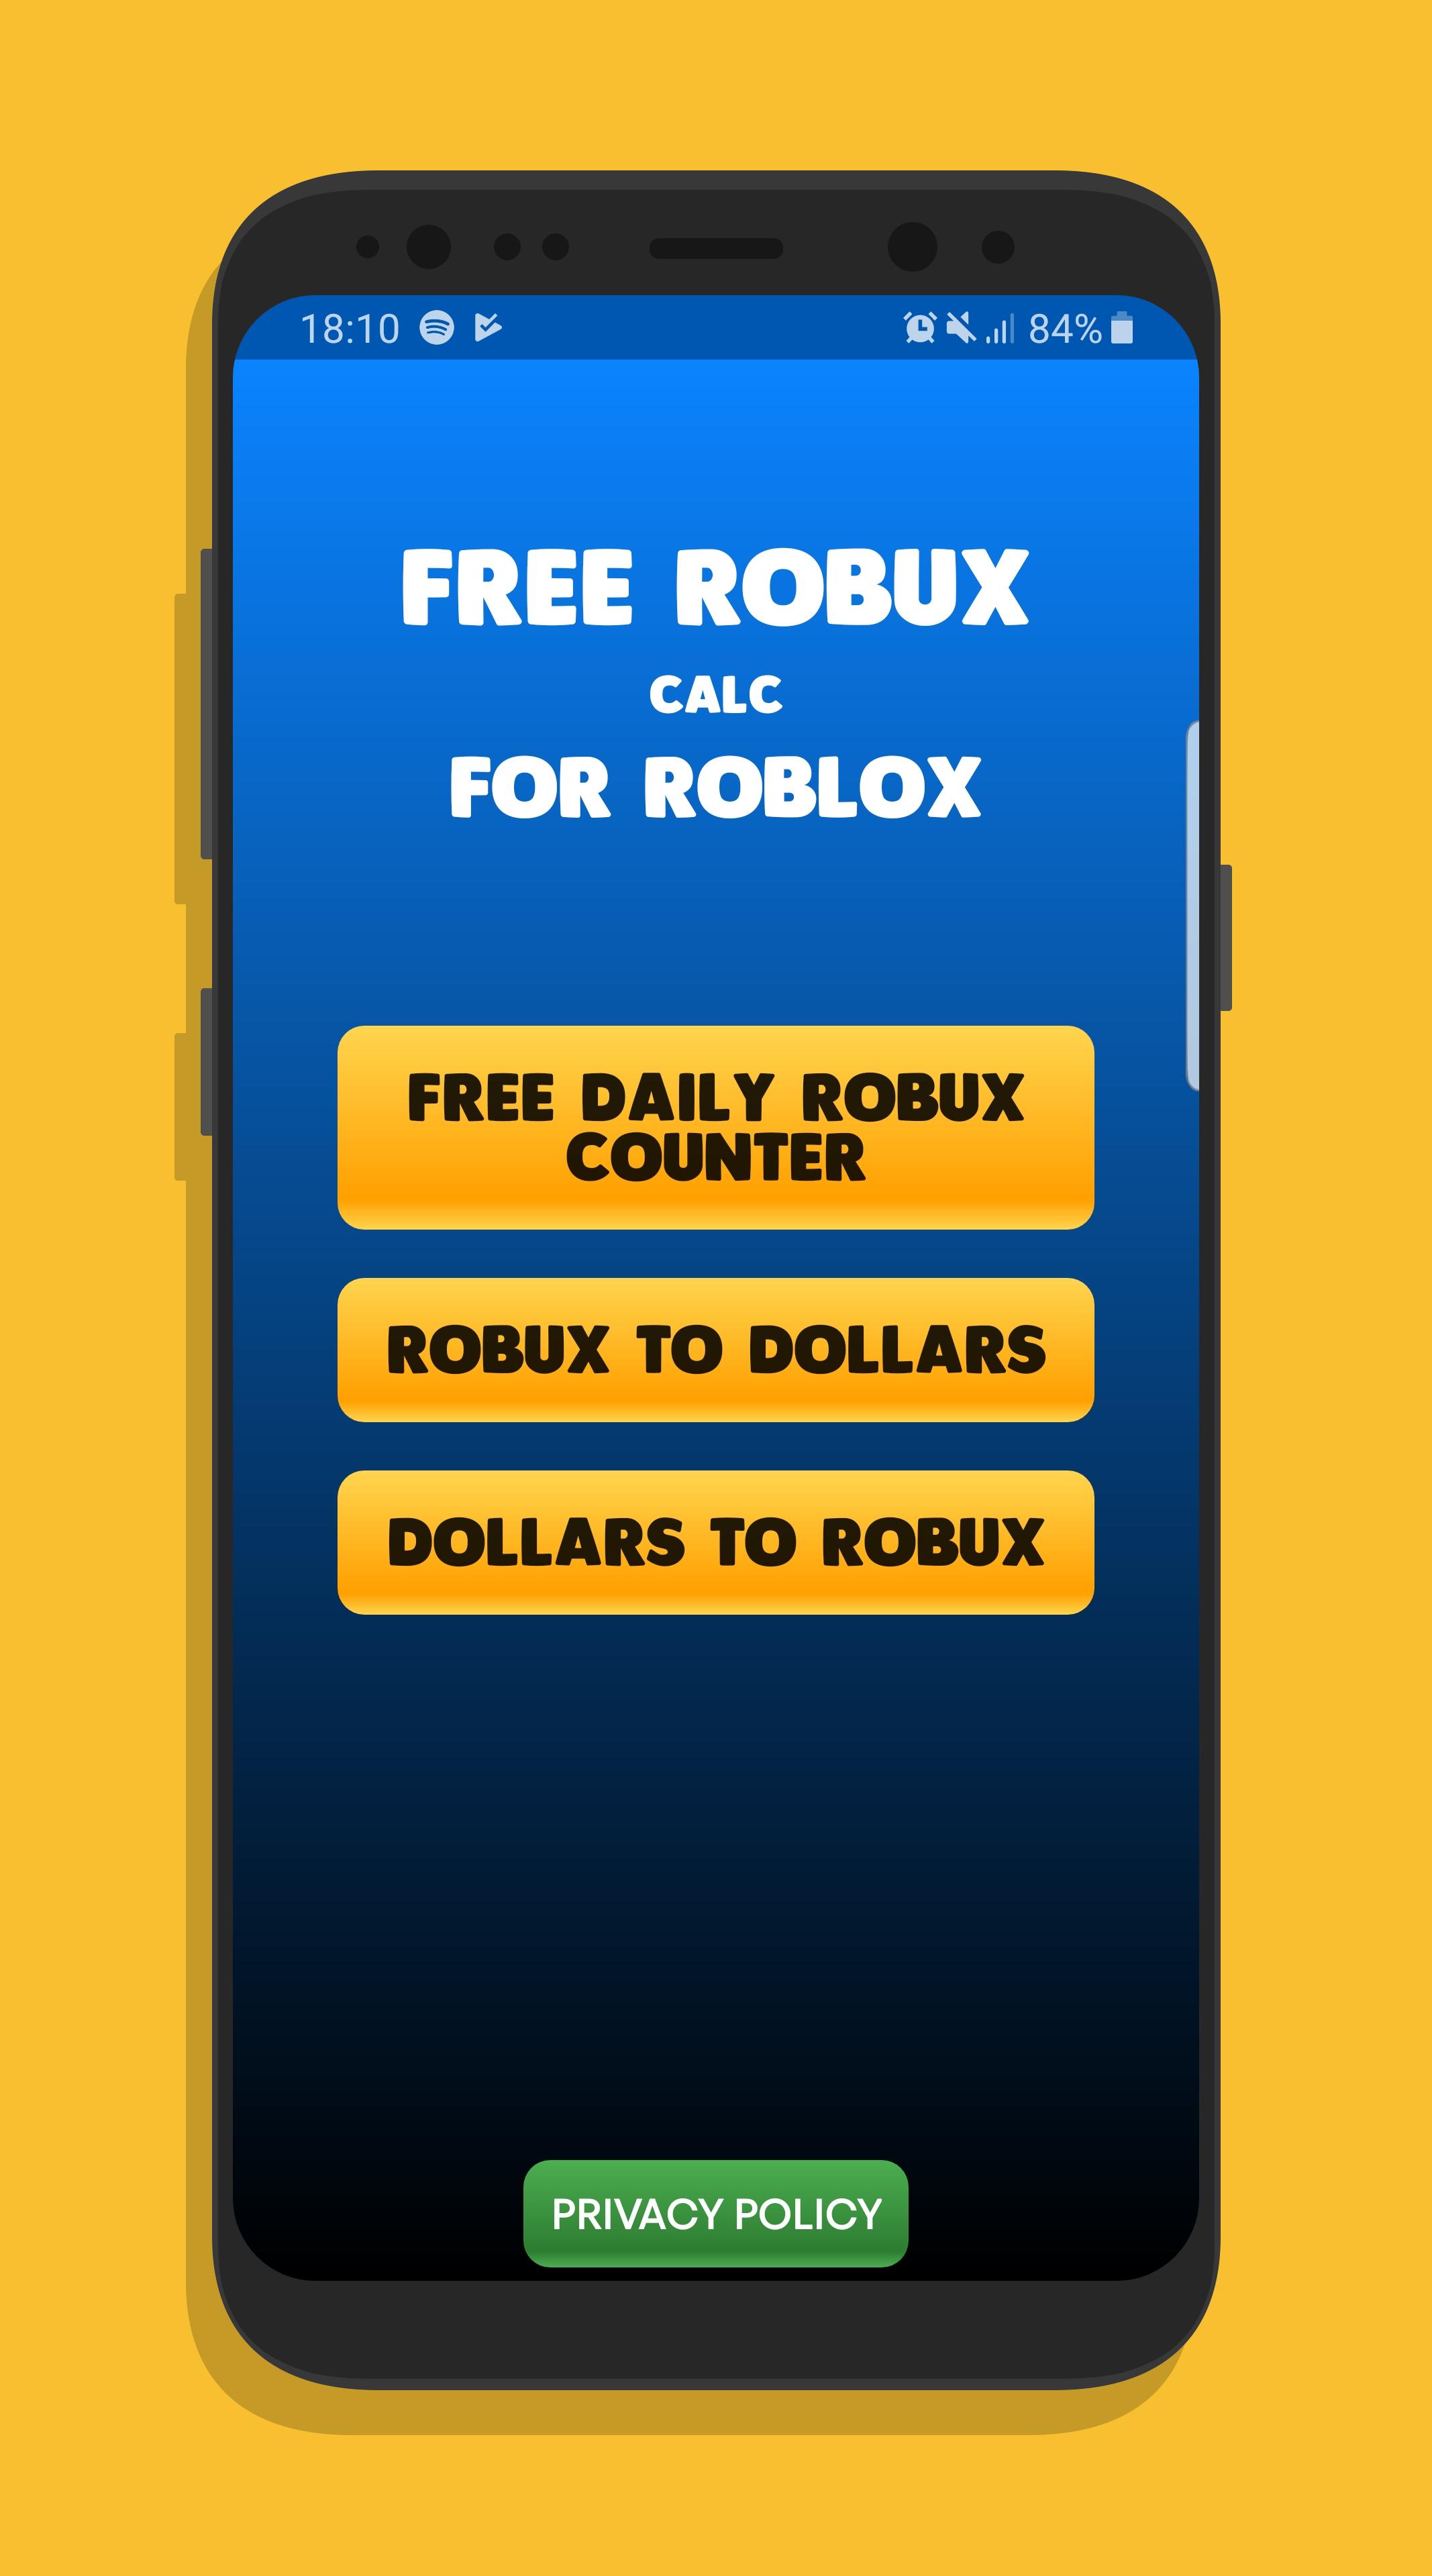 Get Free Robux Calc Pro For Roblox Players For Android Apk Download - roblox apple launcher free robux legally